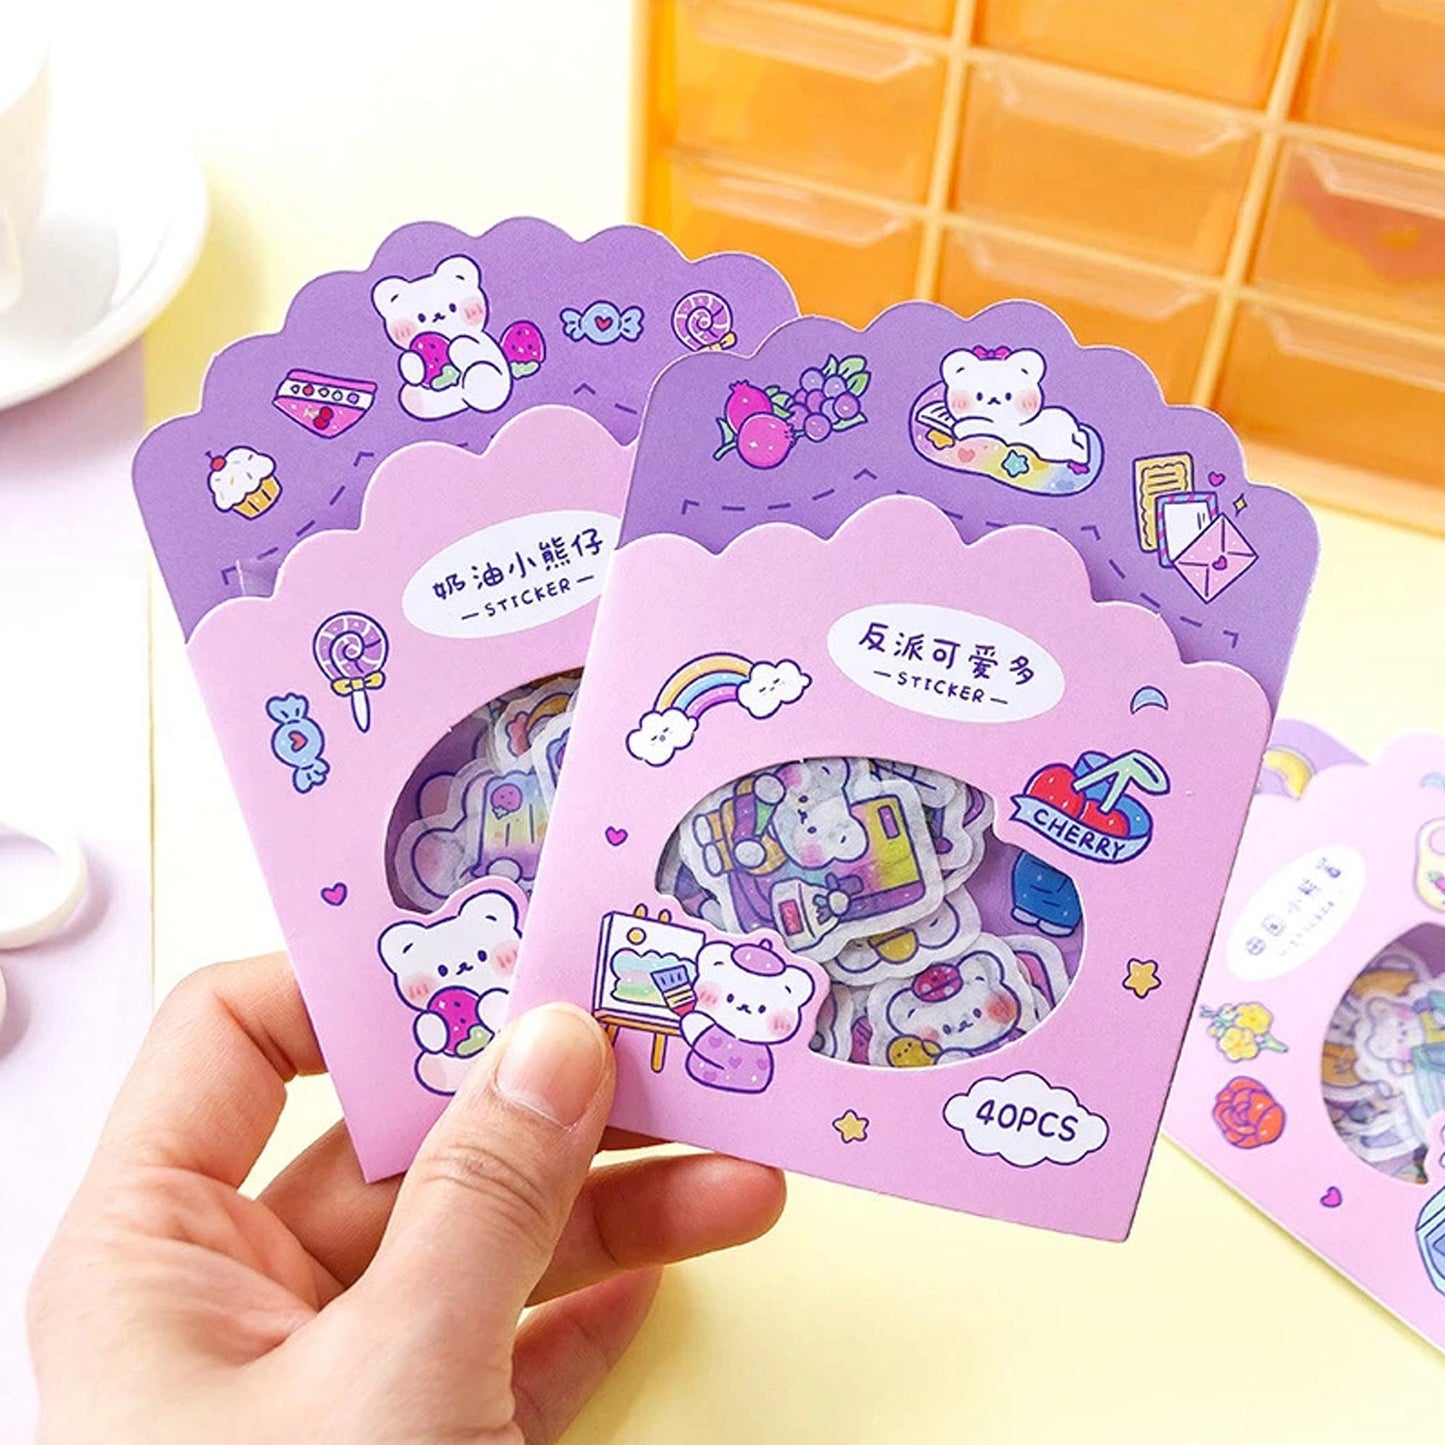 Pink and Purple Kawaii Planner Stickers - Cute Bears - Kawaii stickers, Bear Stickers, Journal Stickers, Stationary Stickers Kawaii Bears B4